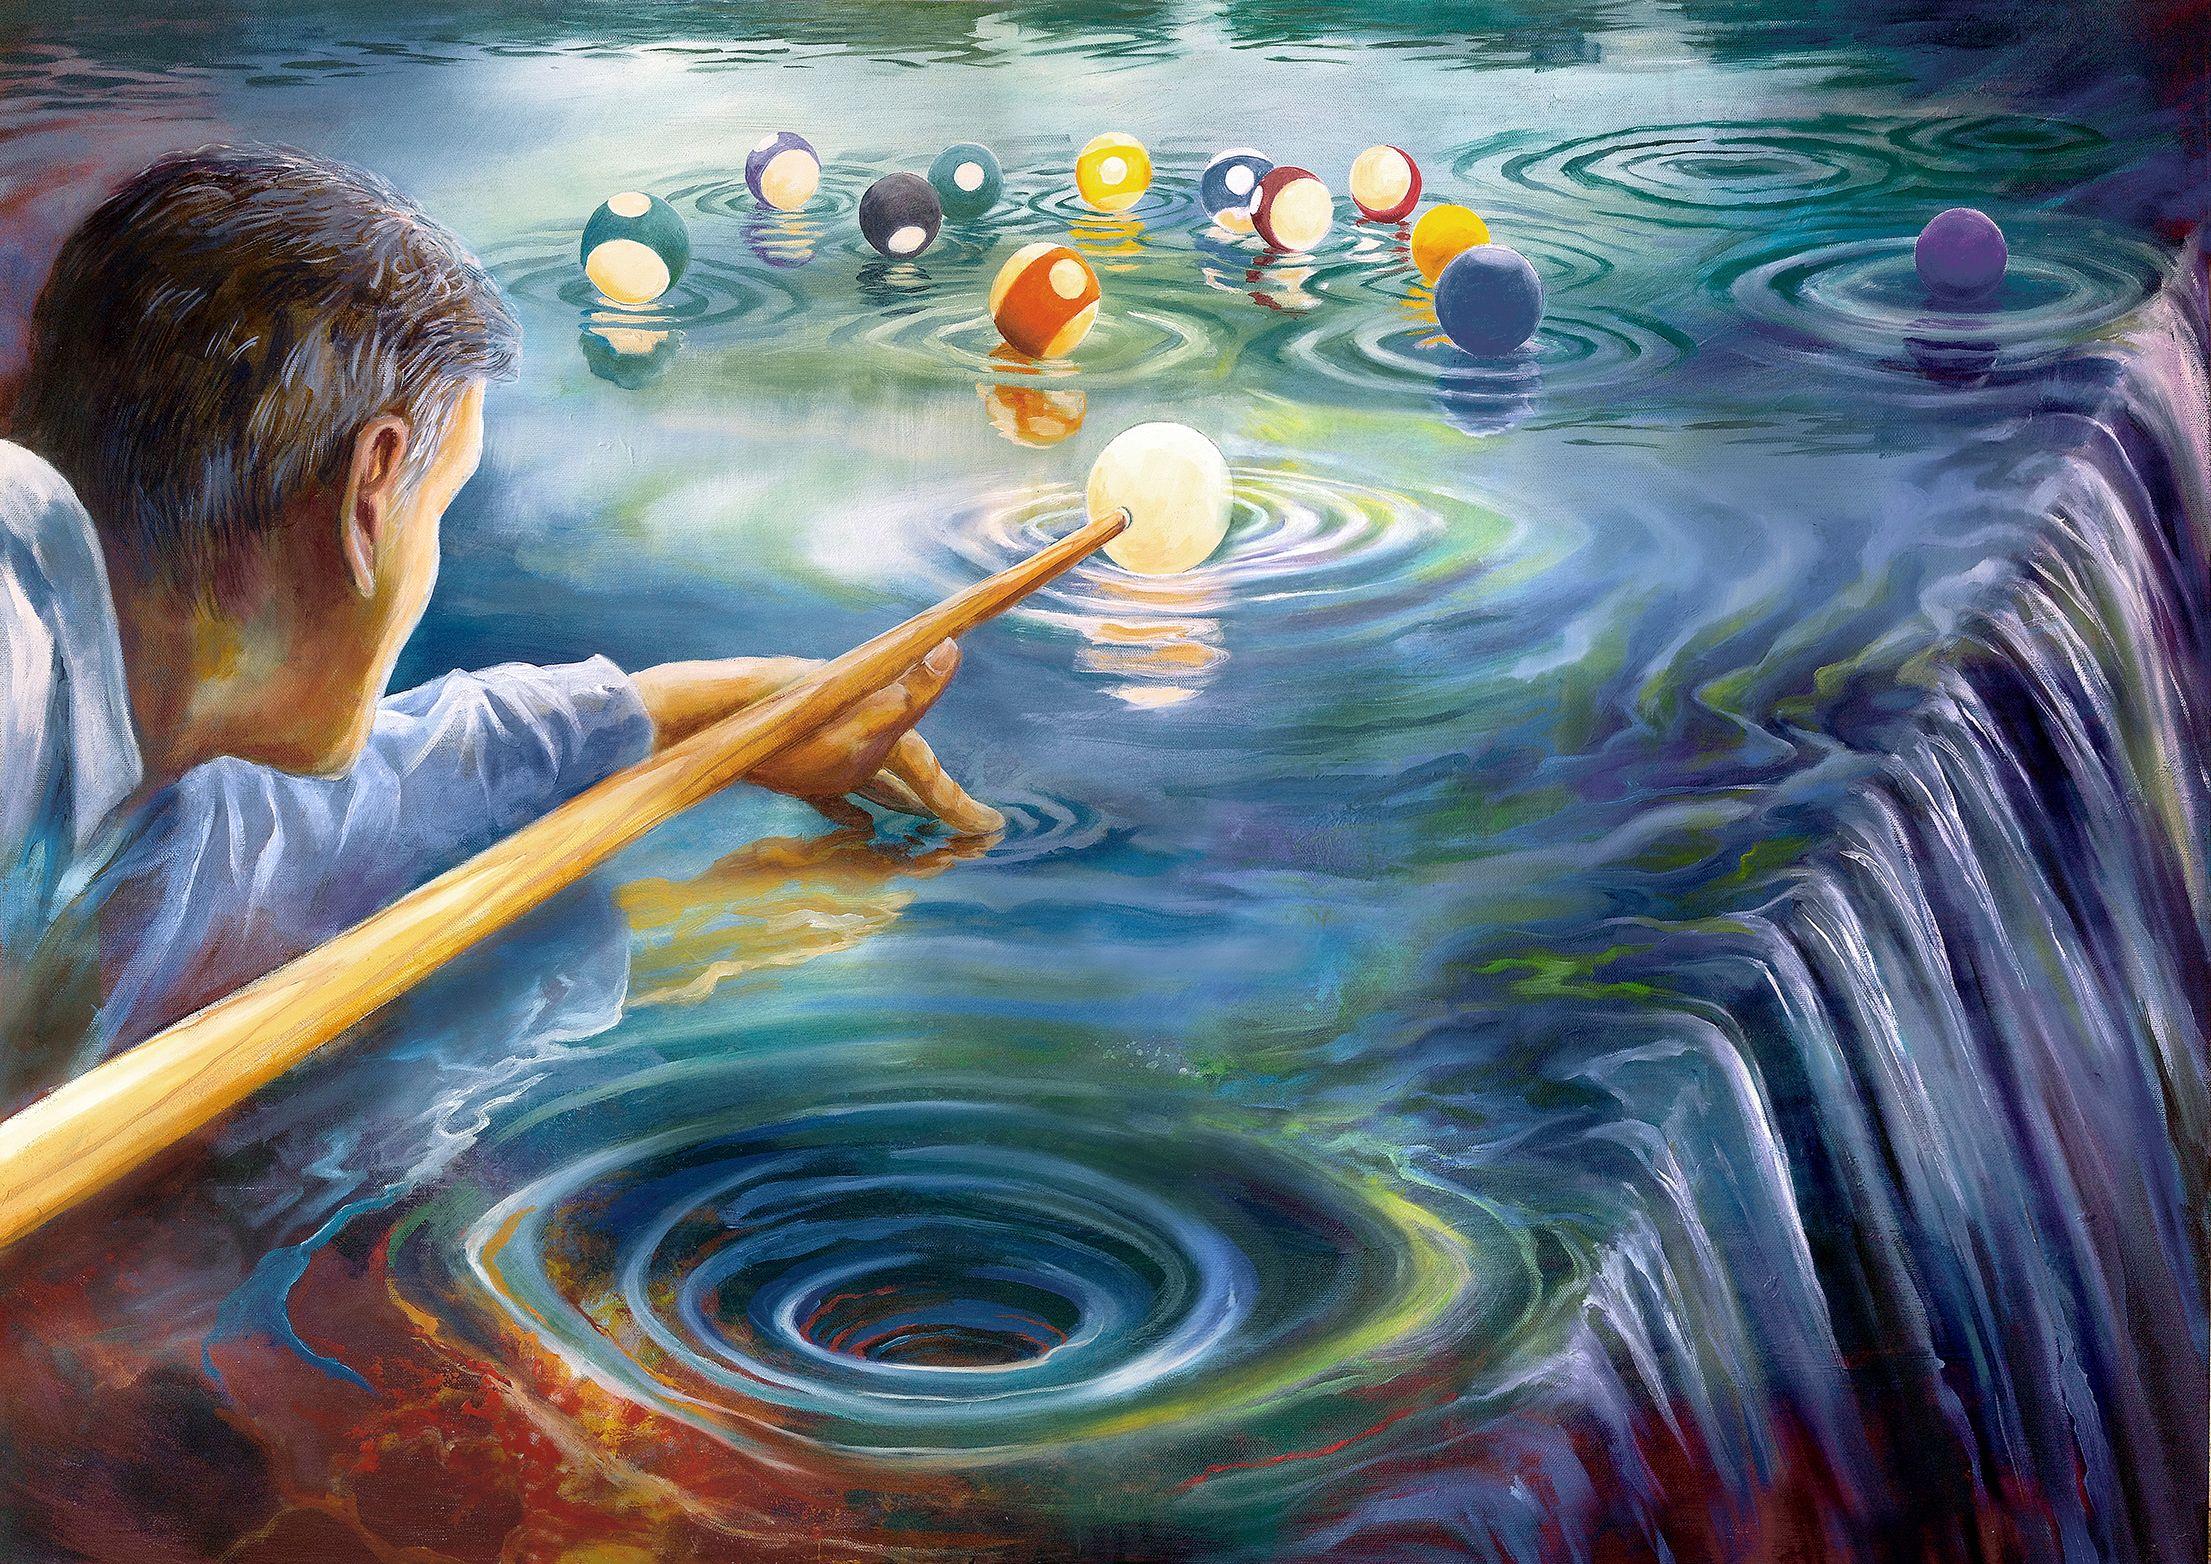 This is purely a surreal painting, without the symbolism that is often the case in my work, but purely surreal images of beauty and calm straight from the subconscious. The water reflects the colours of a pool table and the edge of the table is